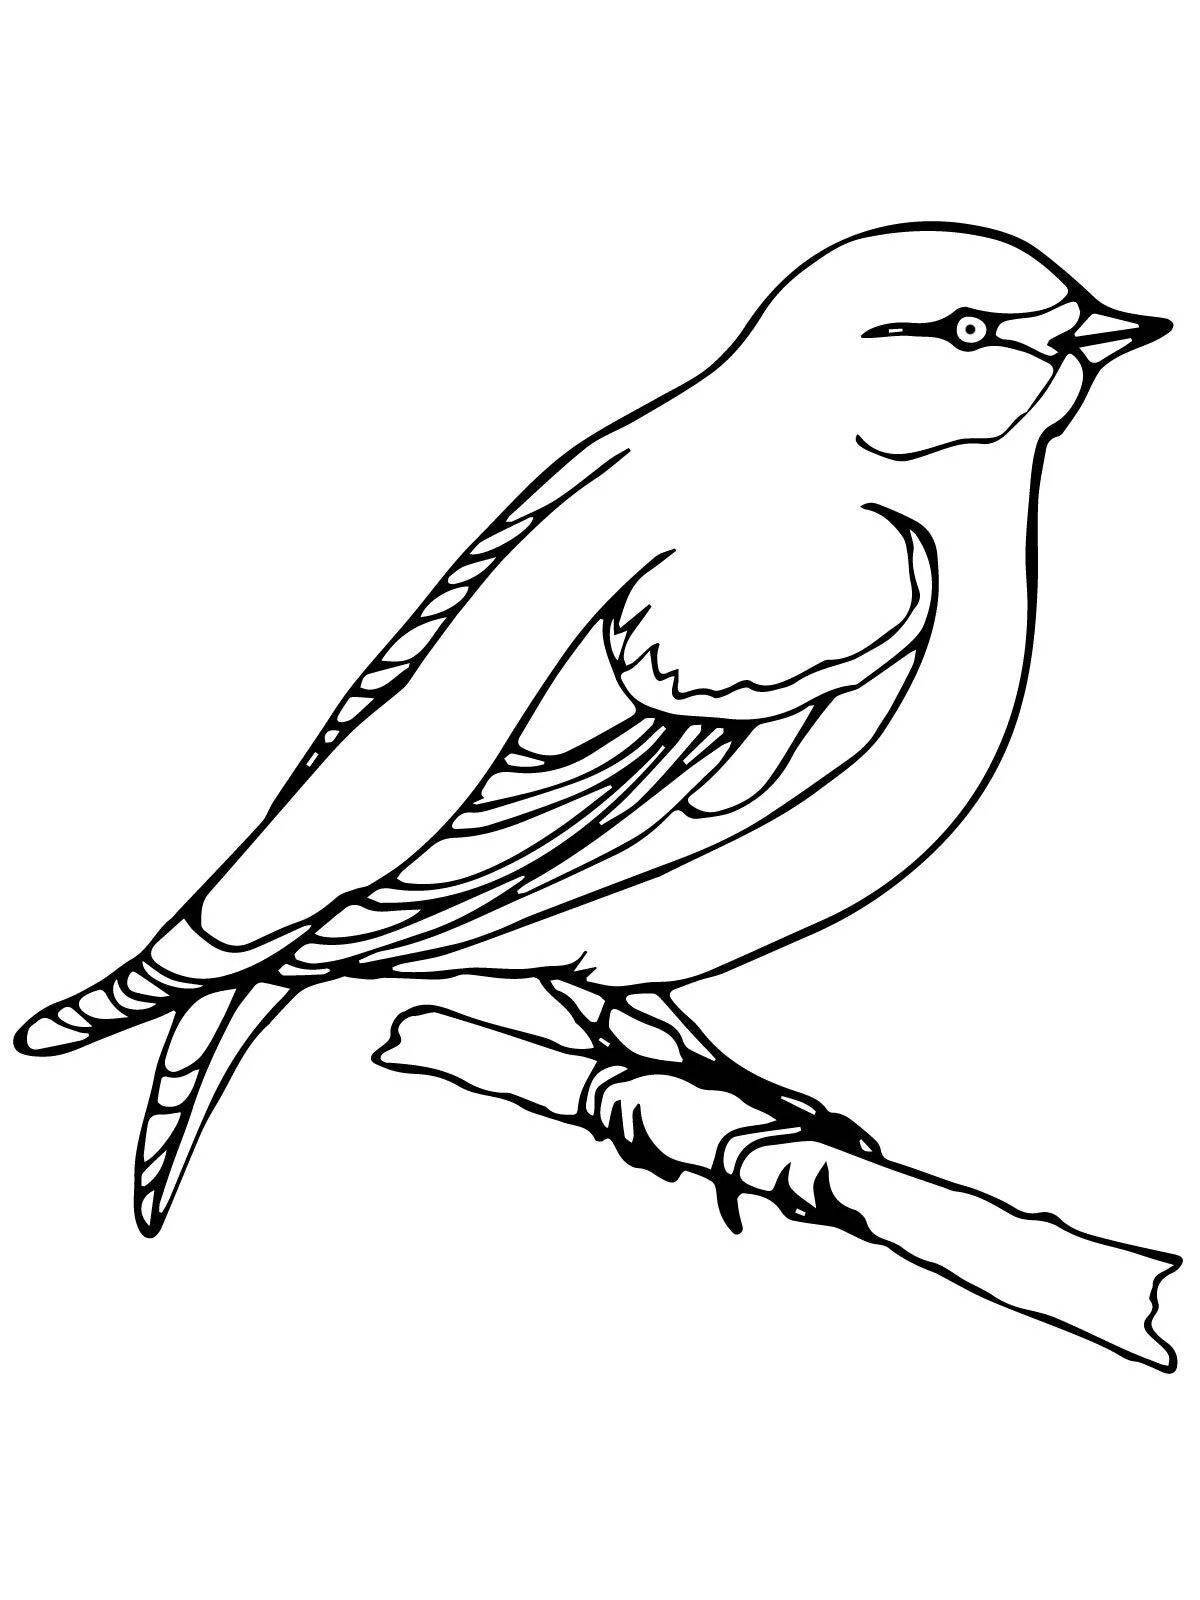 Coloring book bright nightingale for children